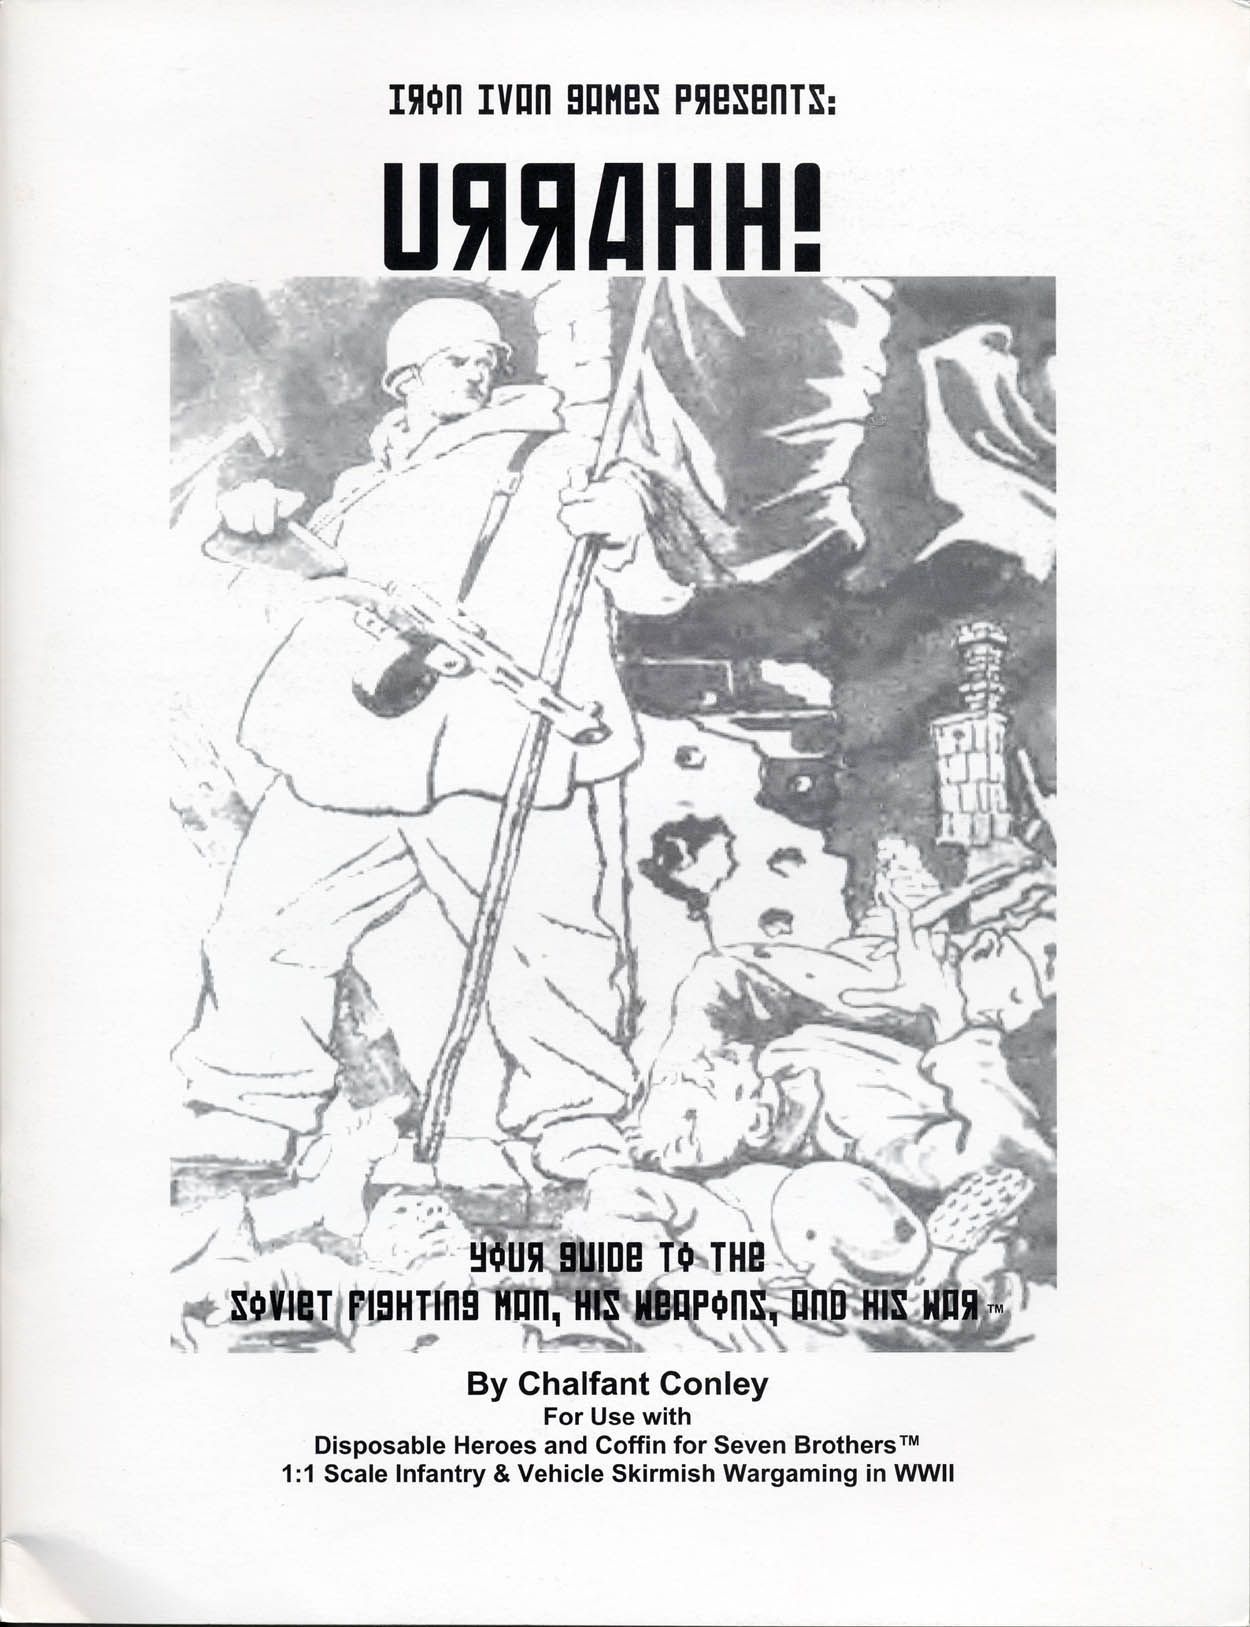 Urrahh! Your Guide to the Soviet Fighting Man, His Weapons, and His War